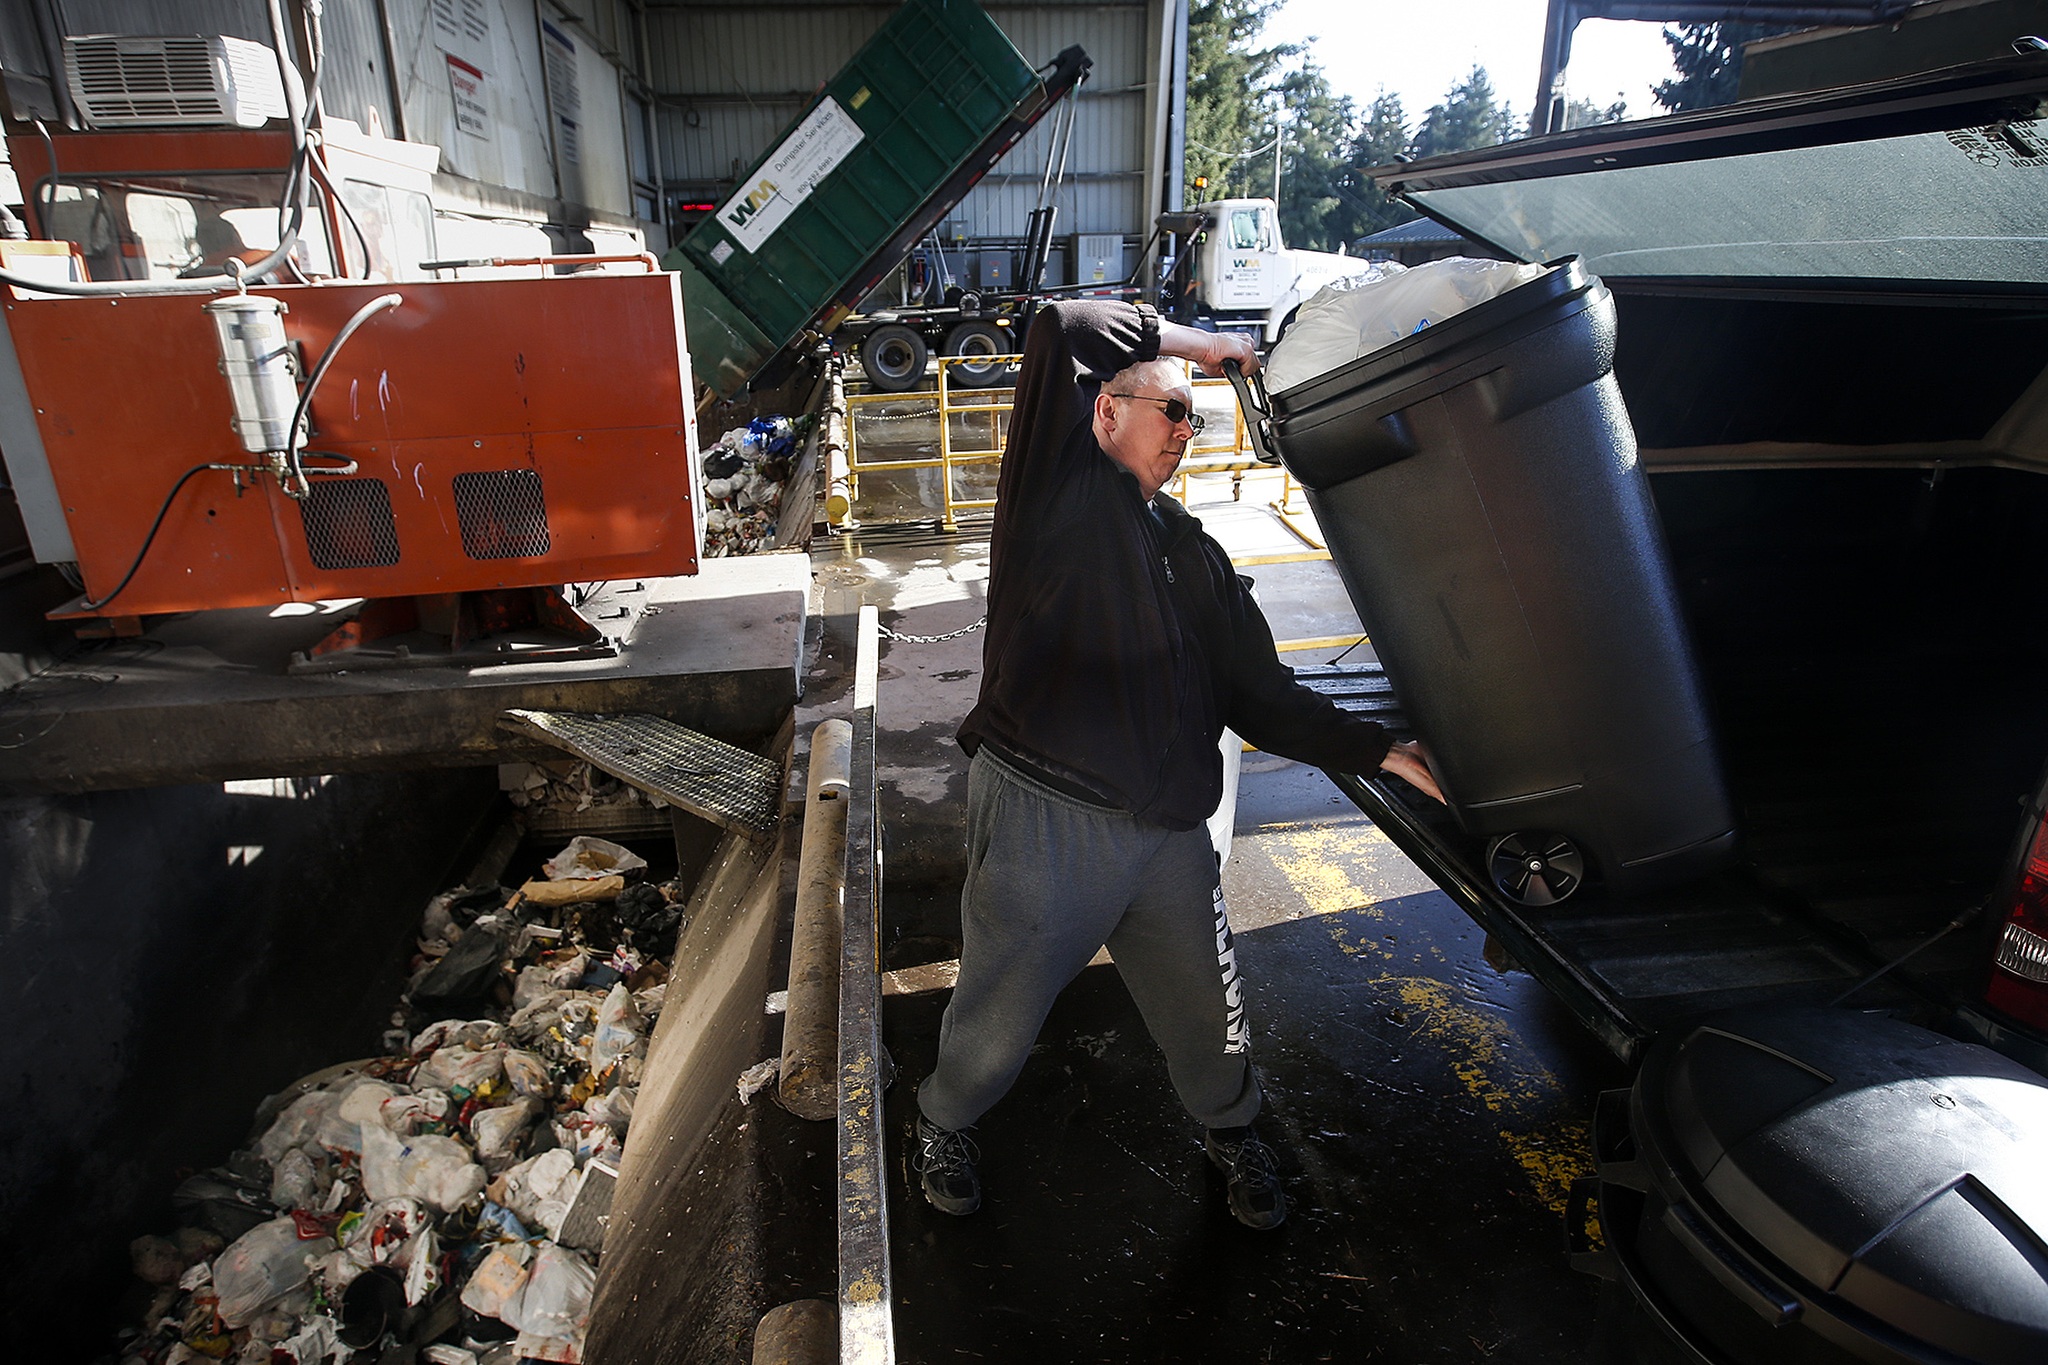 Scott Reed, of Stanwood, hoists a container of garbage out of his truck at the North County Transfer Station in Arlington on Thursday. The station collects, processes and offloads approximately 335 tons of waste each day. (Ian Terry / The Herald)